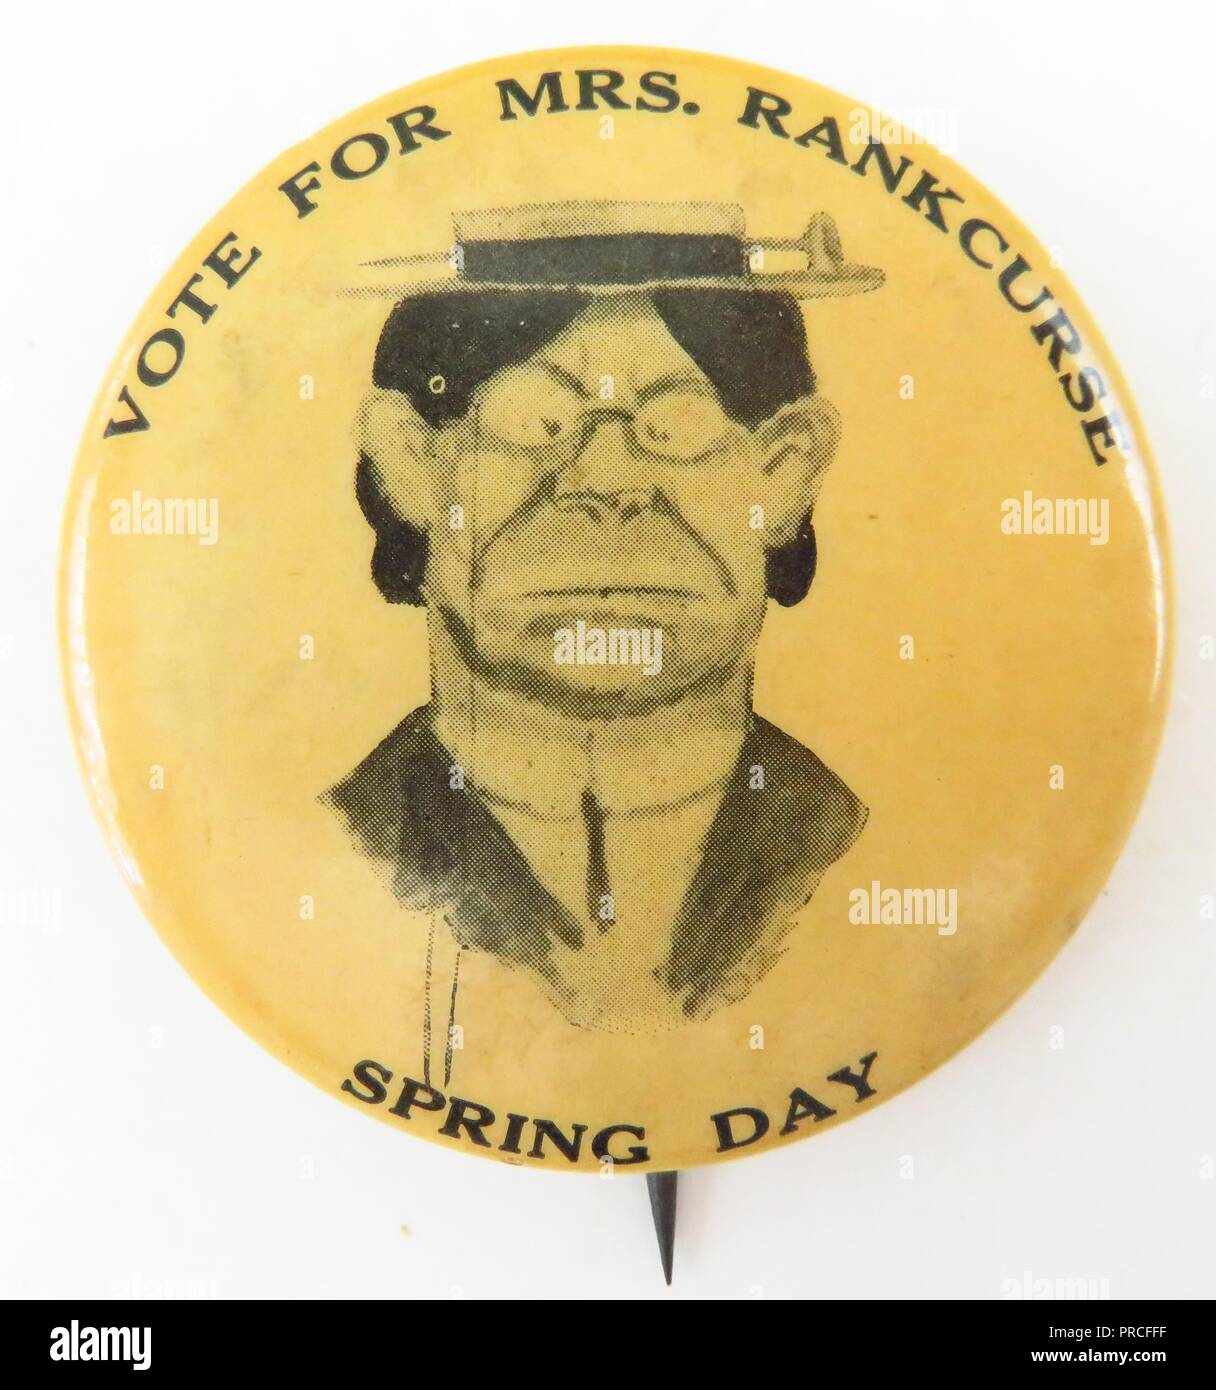 Black and cream anti-suffrage pin, with a caricature of the English, militant suffrage leader, Emmeline Pankhurst, and with the text 'Vote For Mrs Rankcurse, Spring Day, ' manufactured for the American market, likely in conjunction with one of Mrs Pankhurst's visits to the United States, 1915. Photography by Emilia van Beugen. () Stock Photo